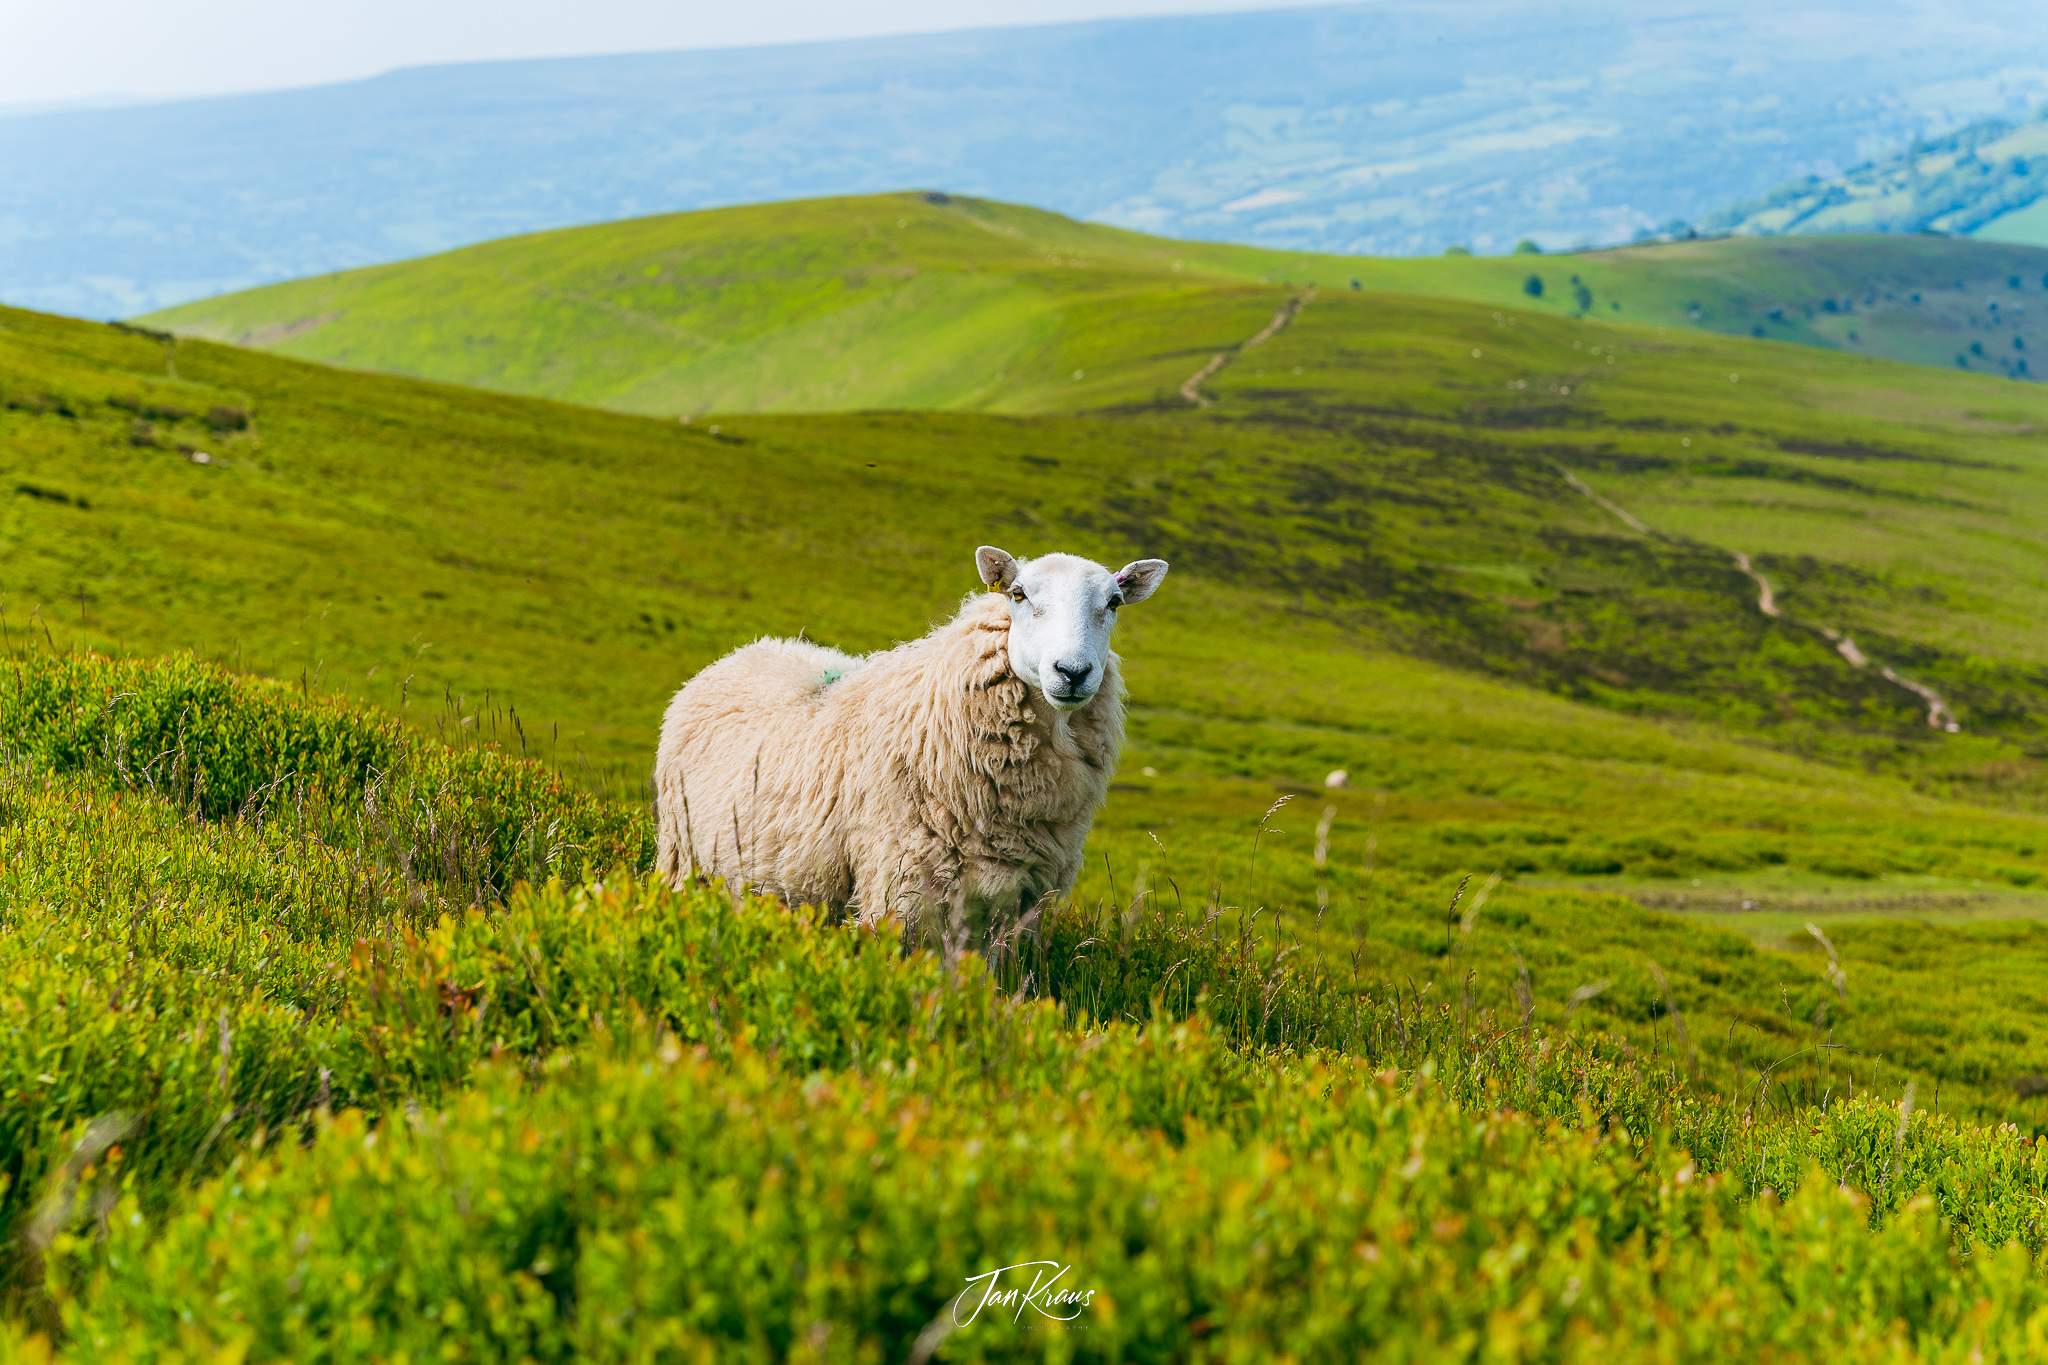 Sheep posing with great background views from Day 2 of The Beacons Way, Wales, UK